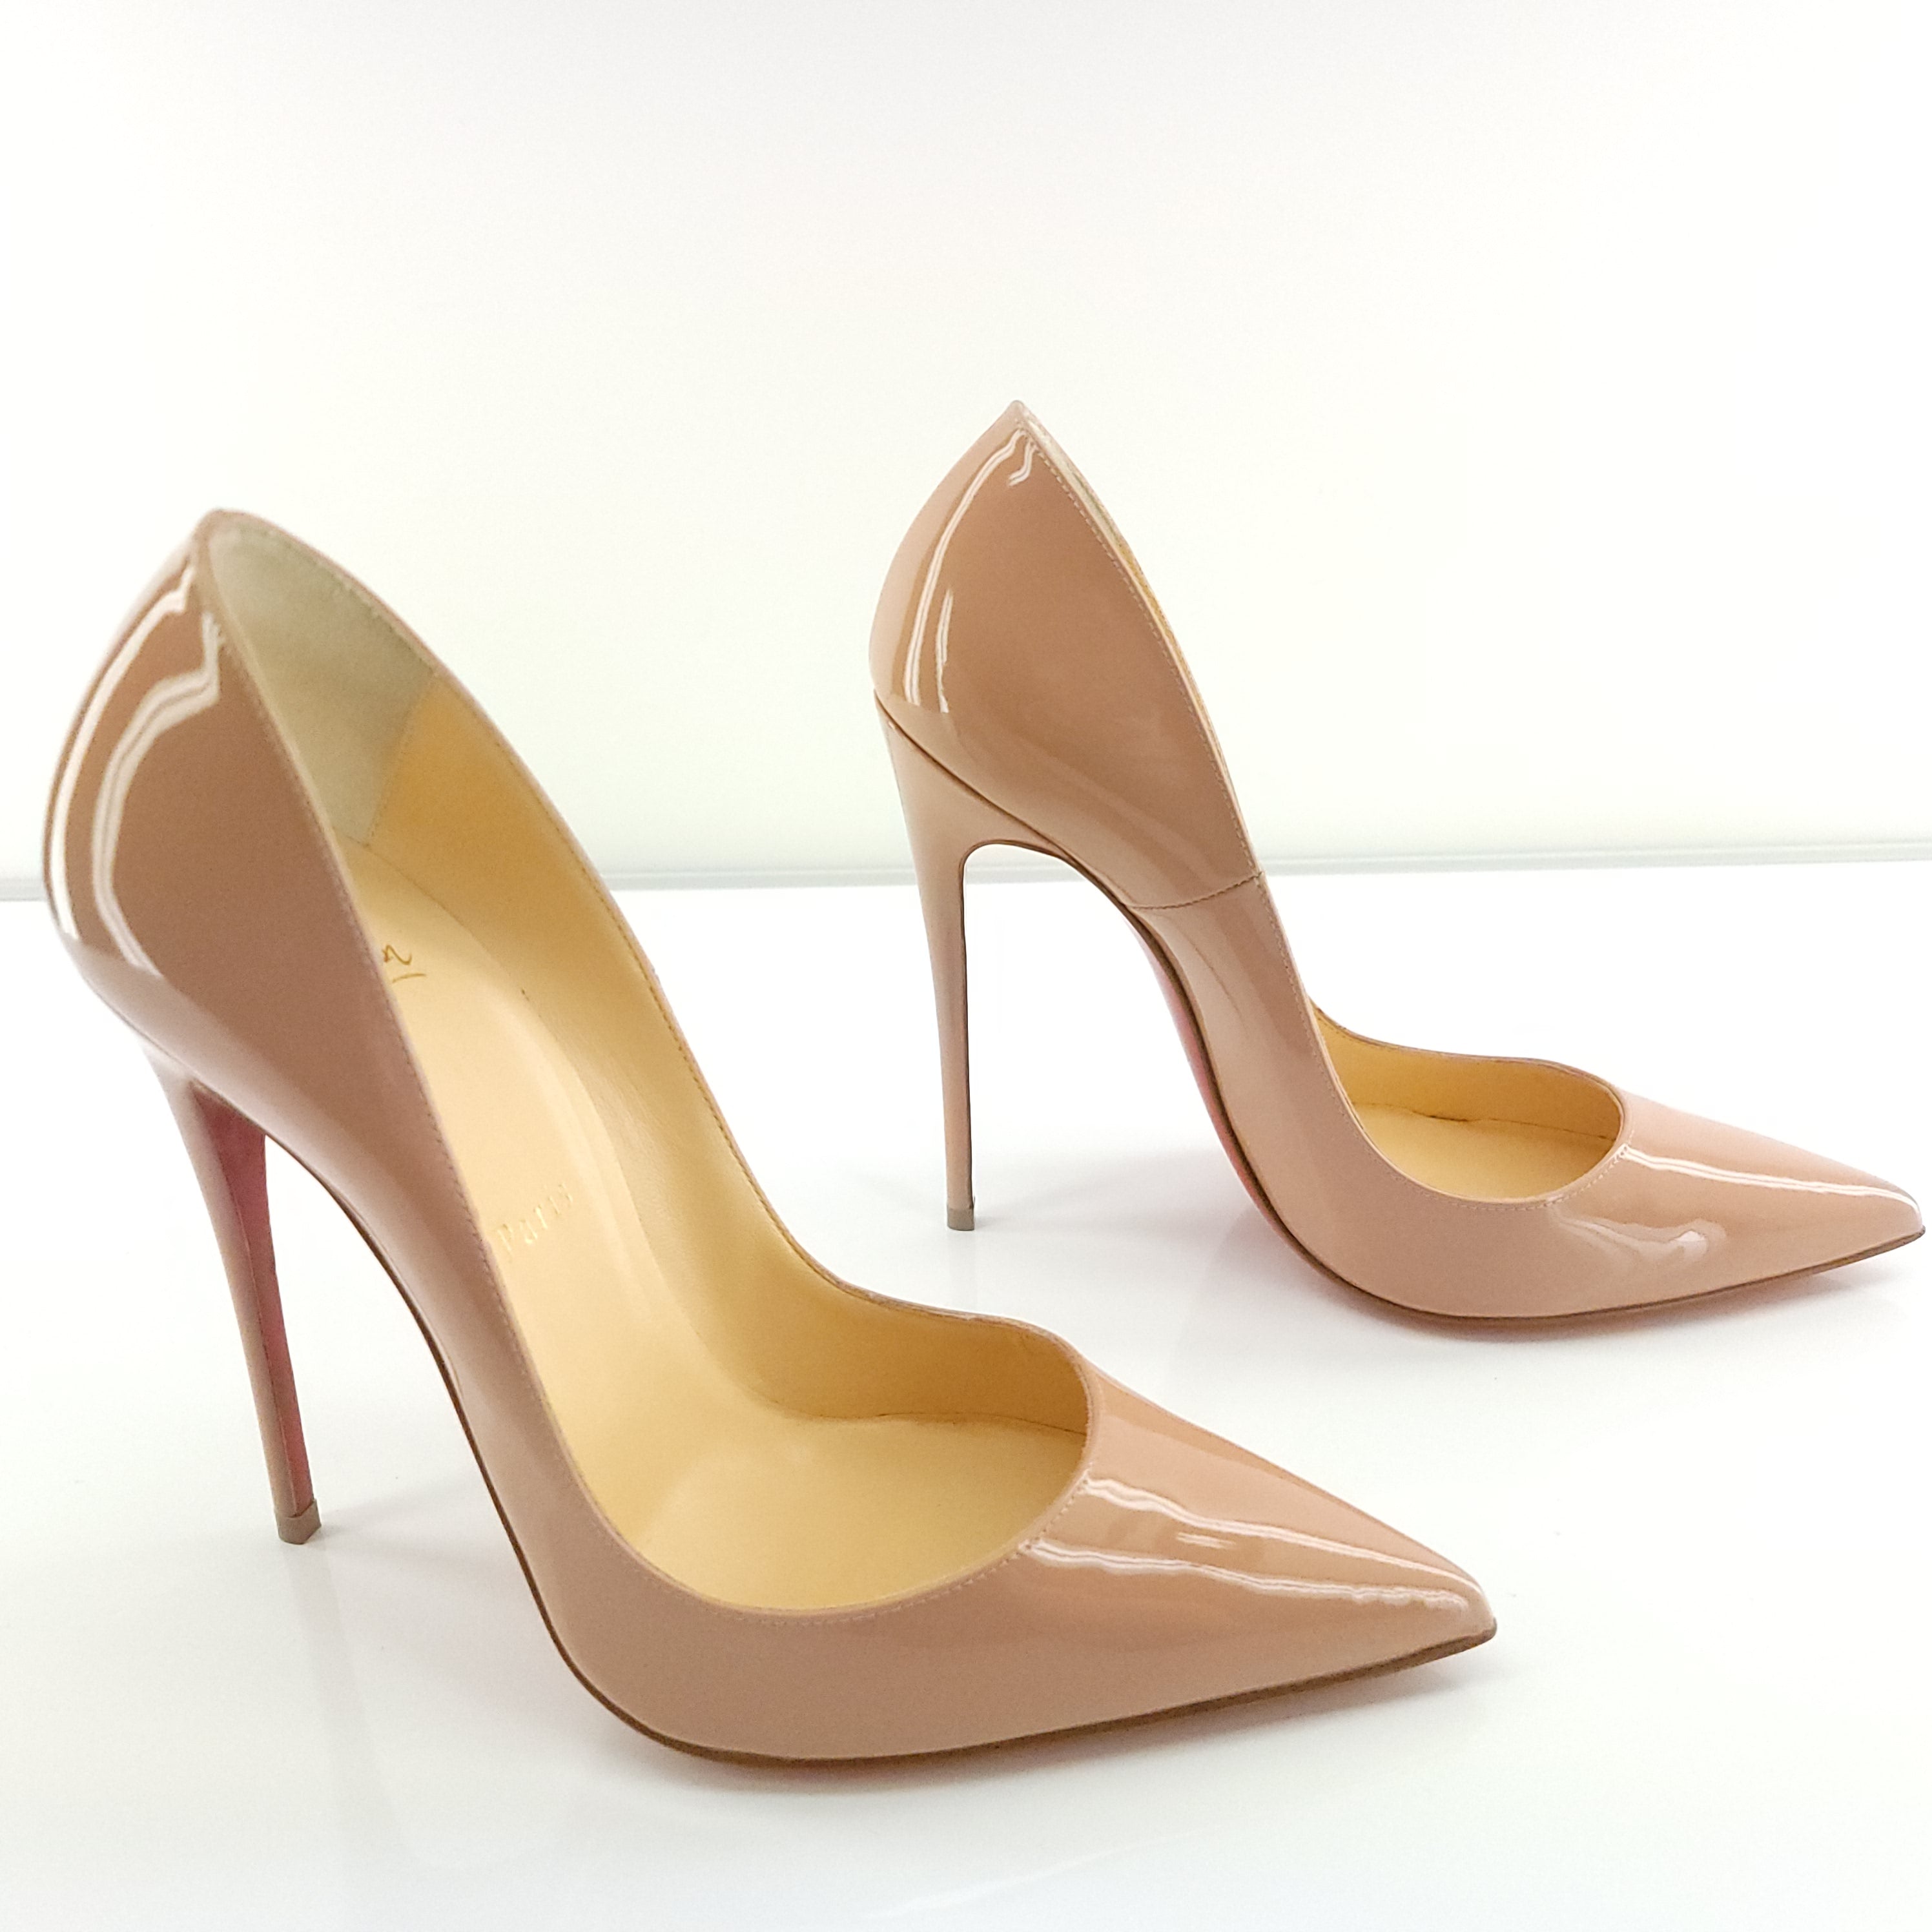 Christian Louboutin So Kate Nude Patent Pointy High Heel Pumps SZ 38.5 $745 120m